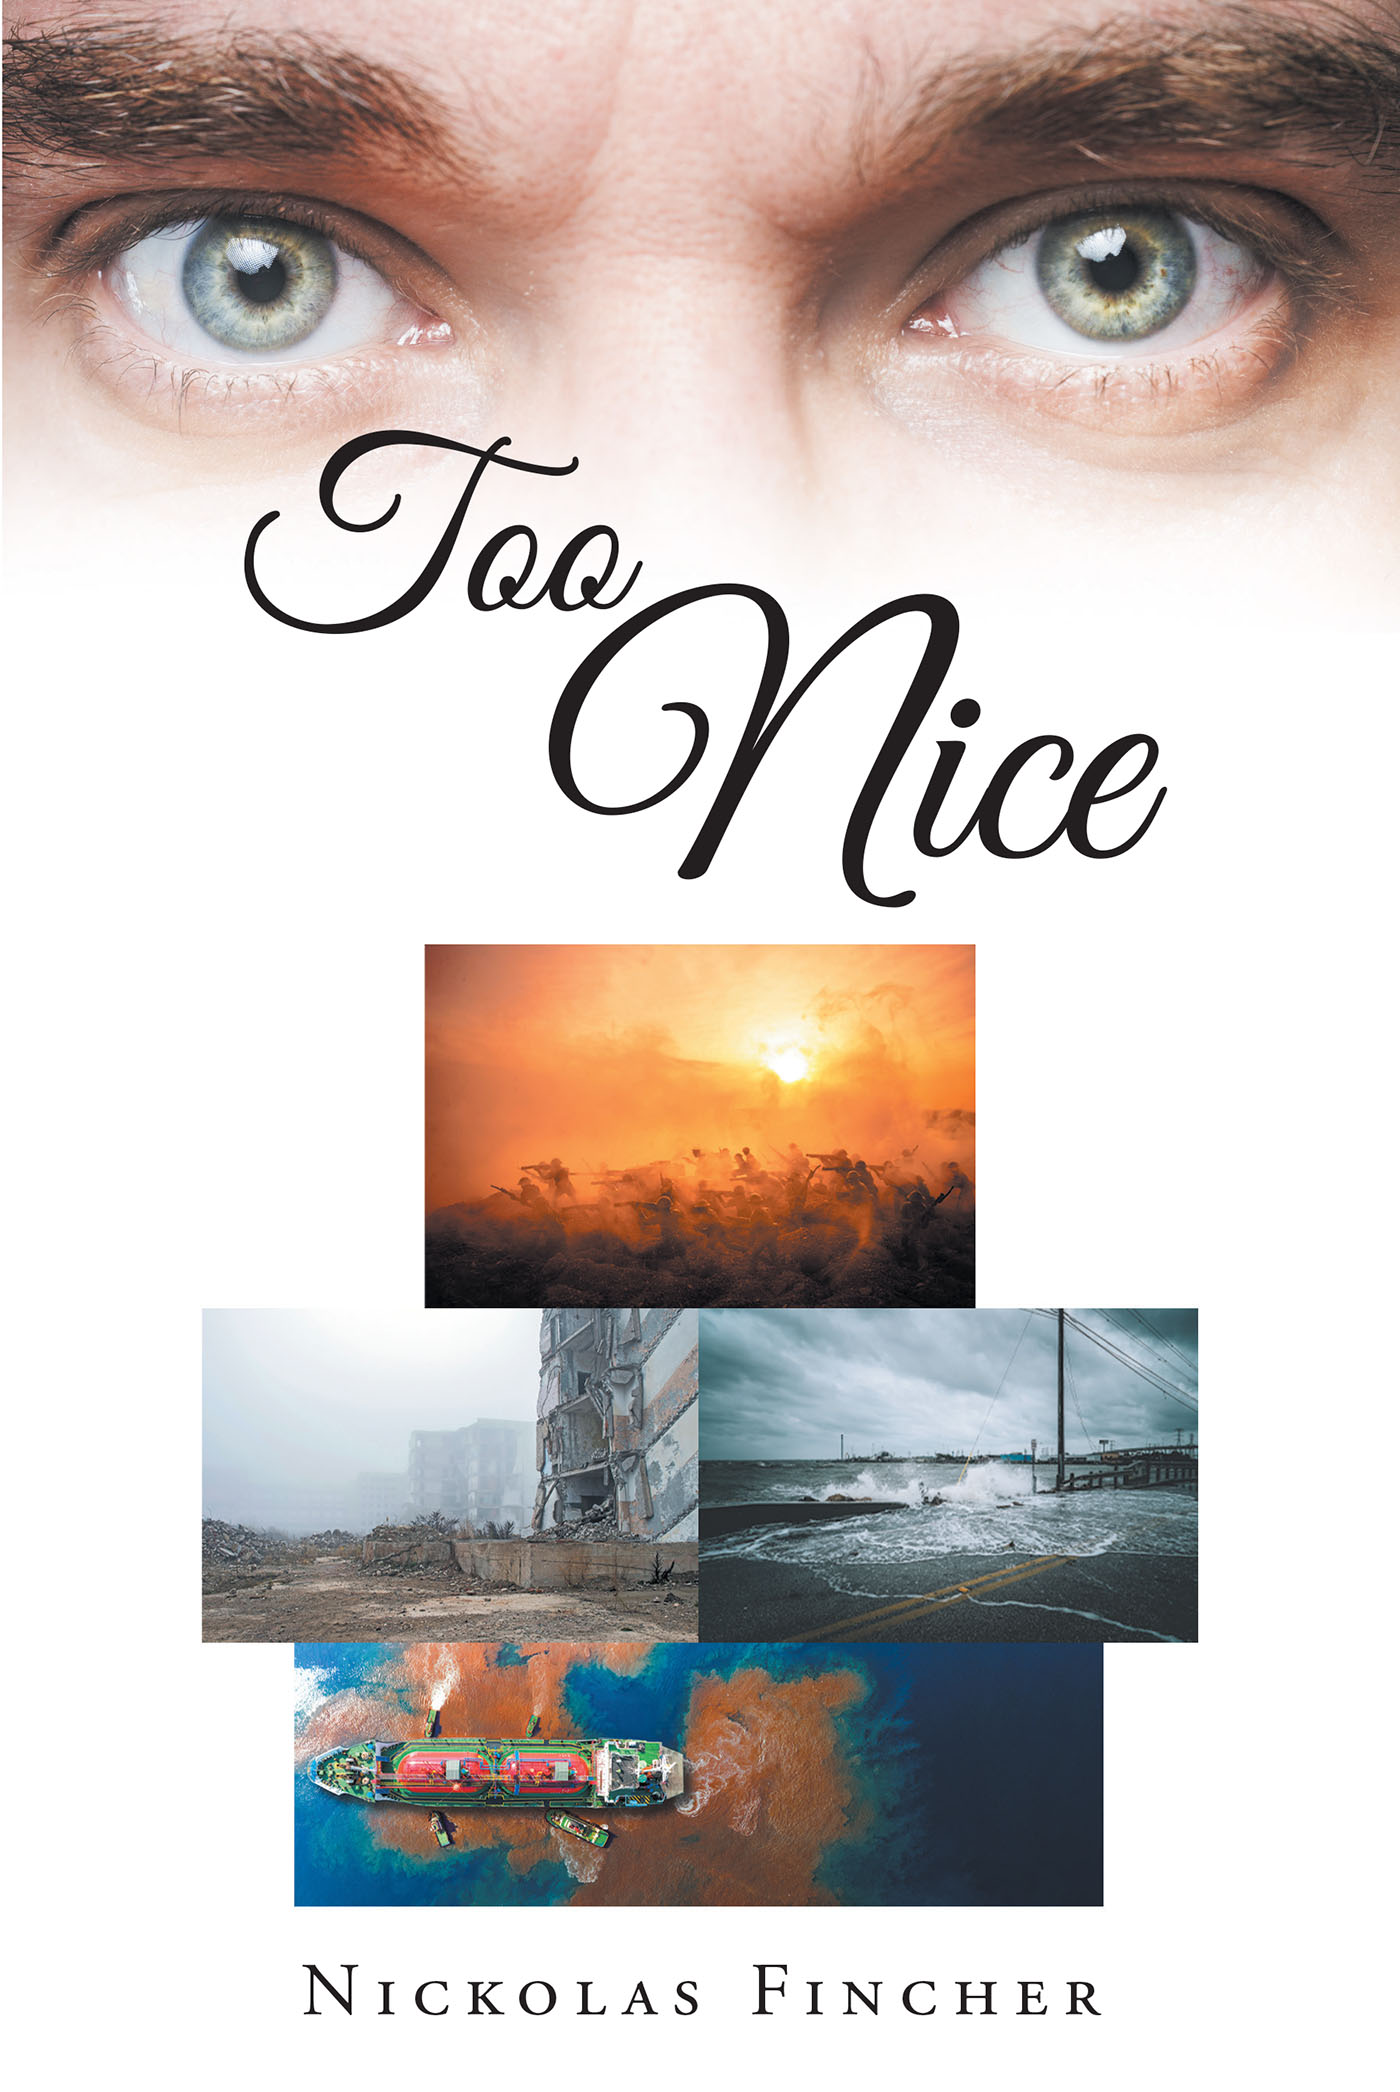 Nickolas Fincher’s Newly Released "Too Nice" is a Powerful Personal Account of a Spiritual Awakening